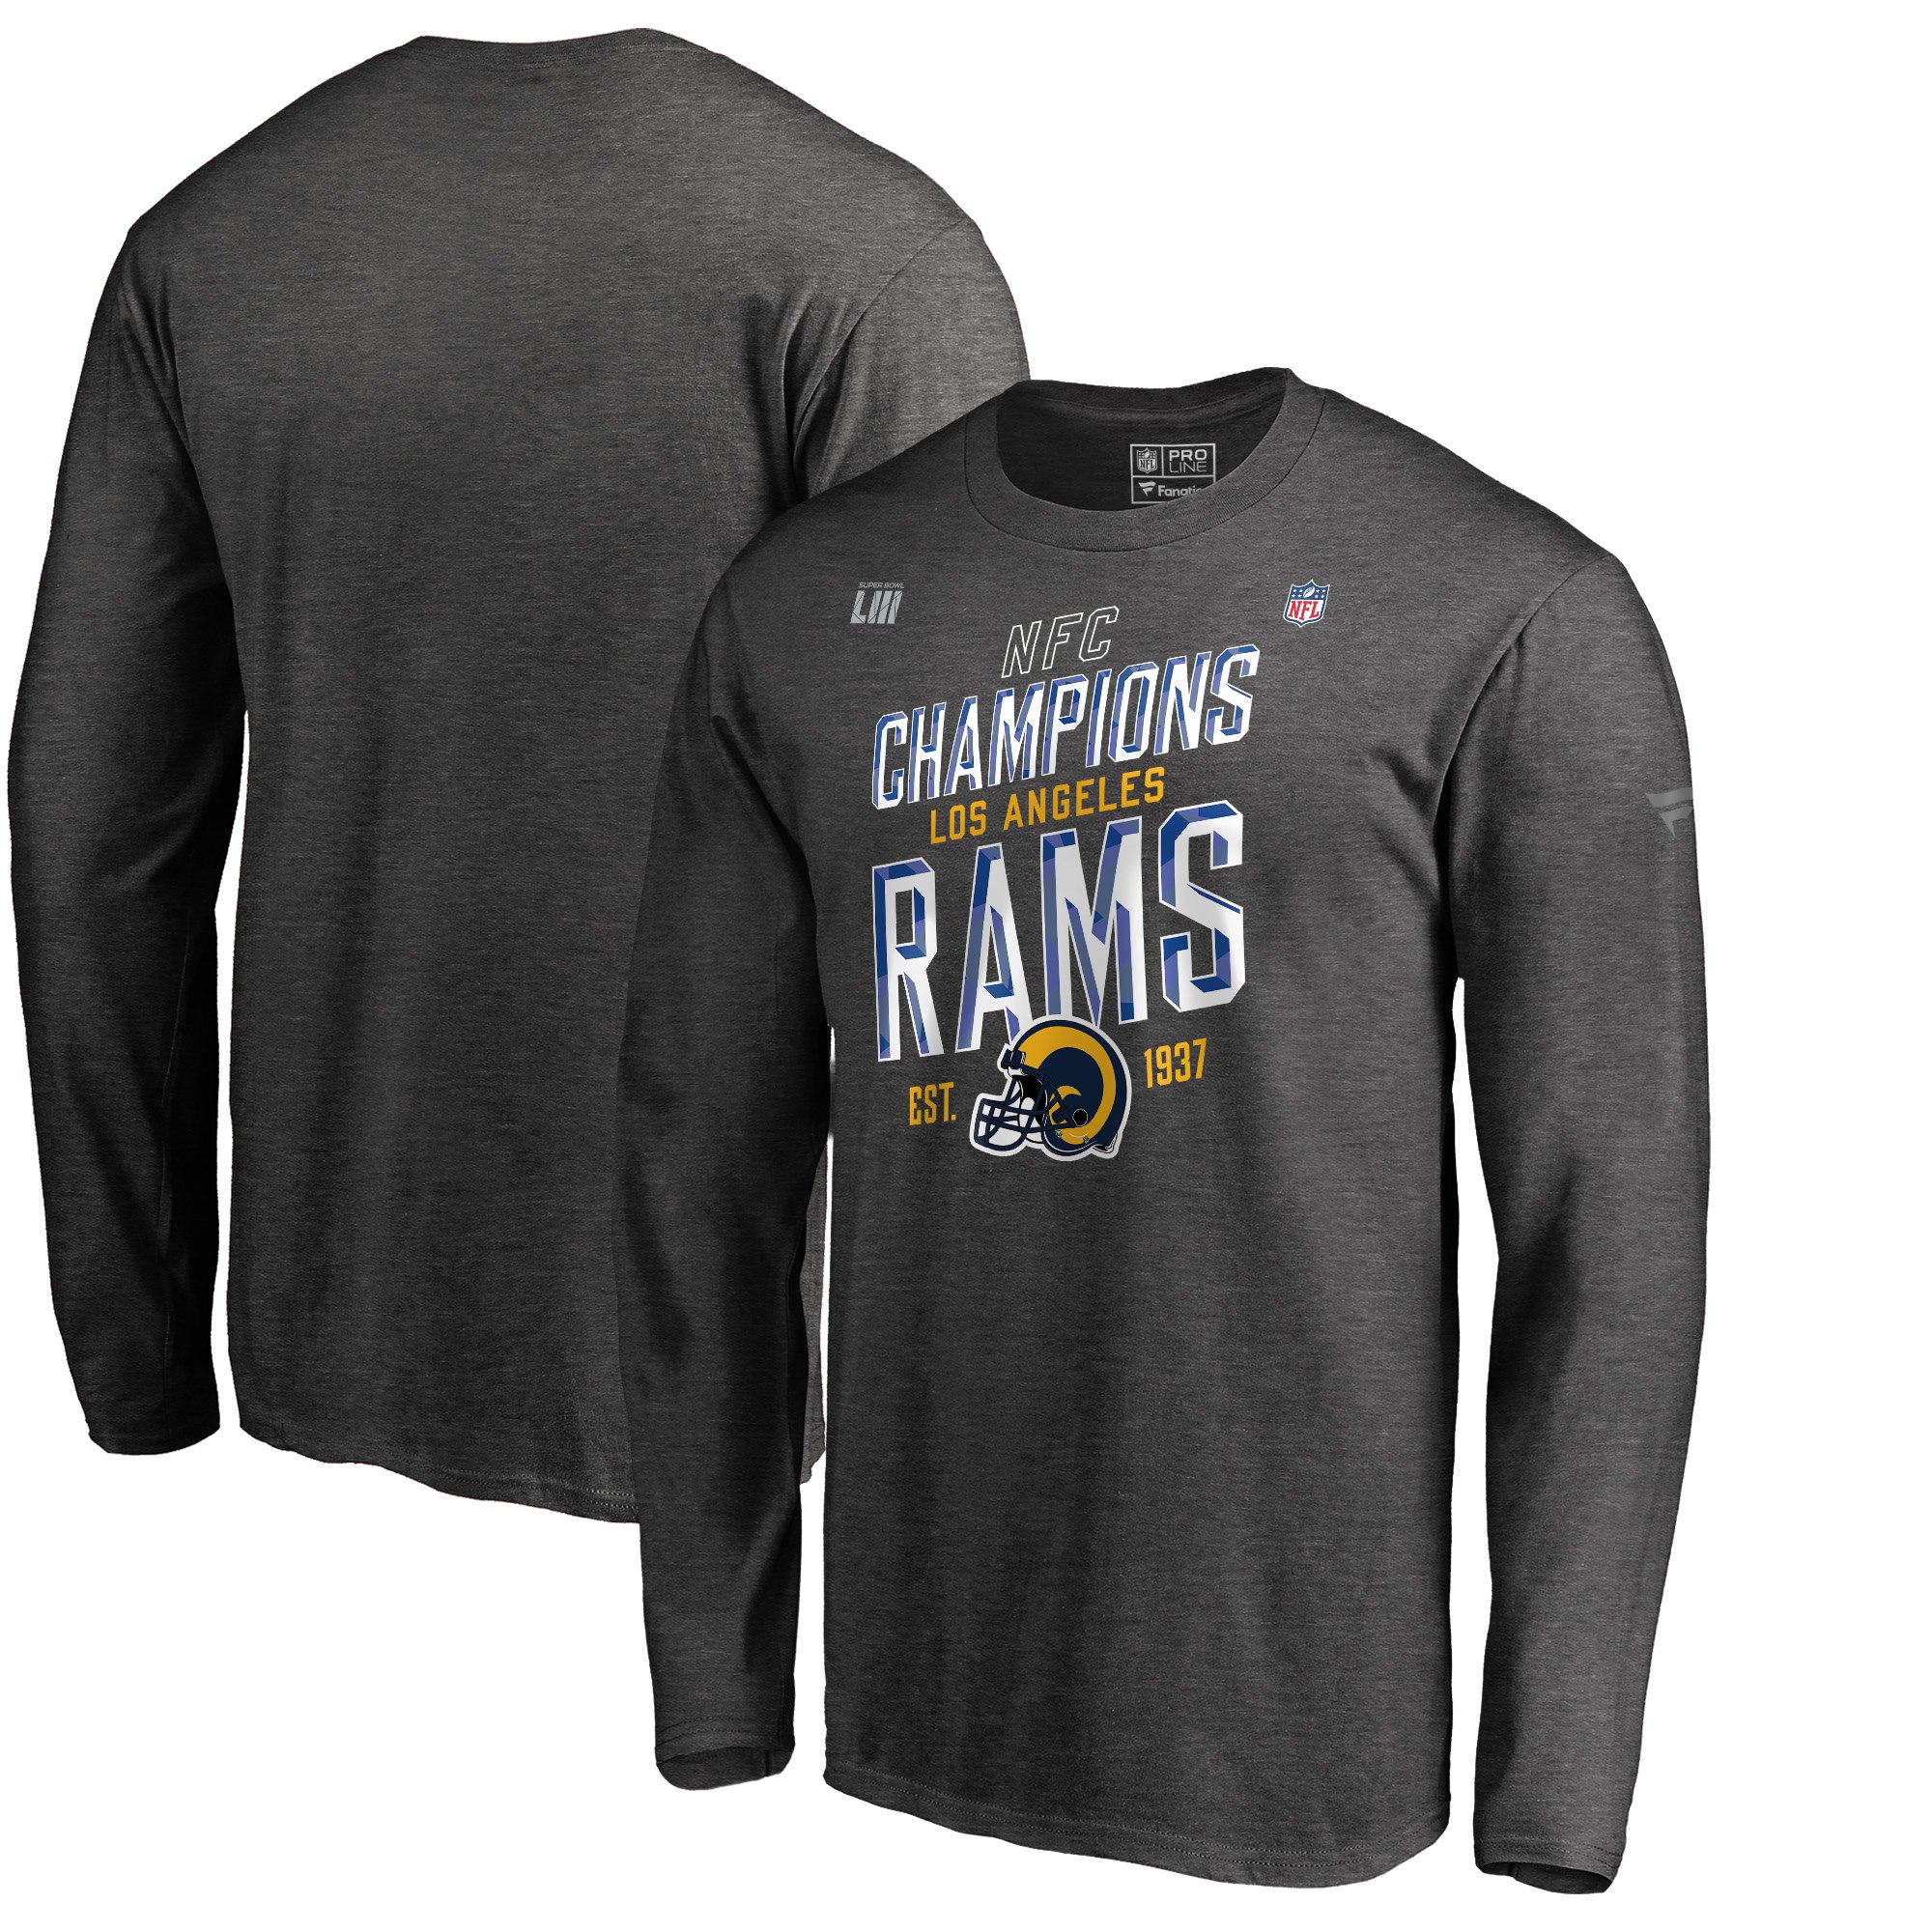 Los Angeles Rams NFL Pro Line by Fanatics Branded 2018 NFC Champions Trophy Collection Locker Room Big & Tall Long Sleeve T-Shirt Heather Charcoal